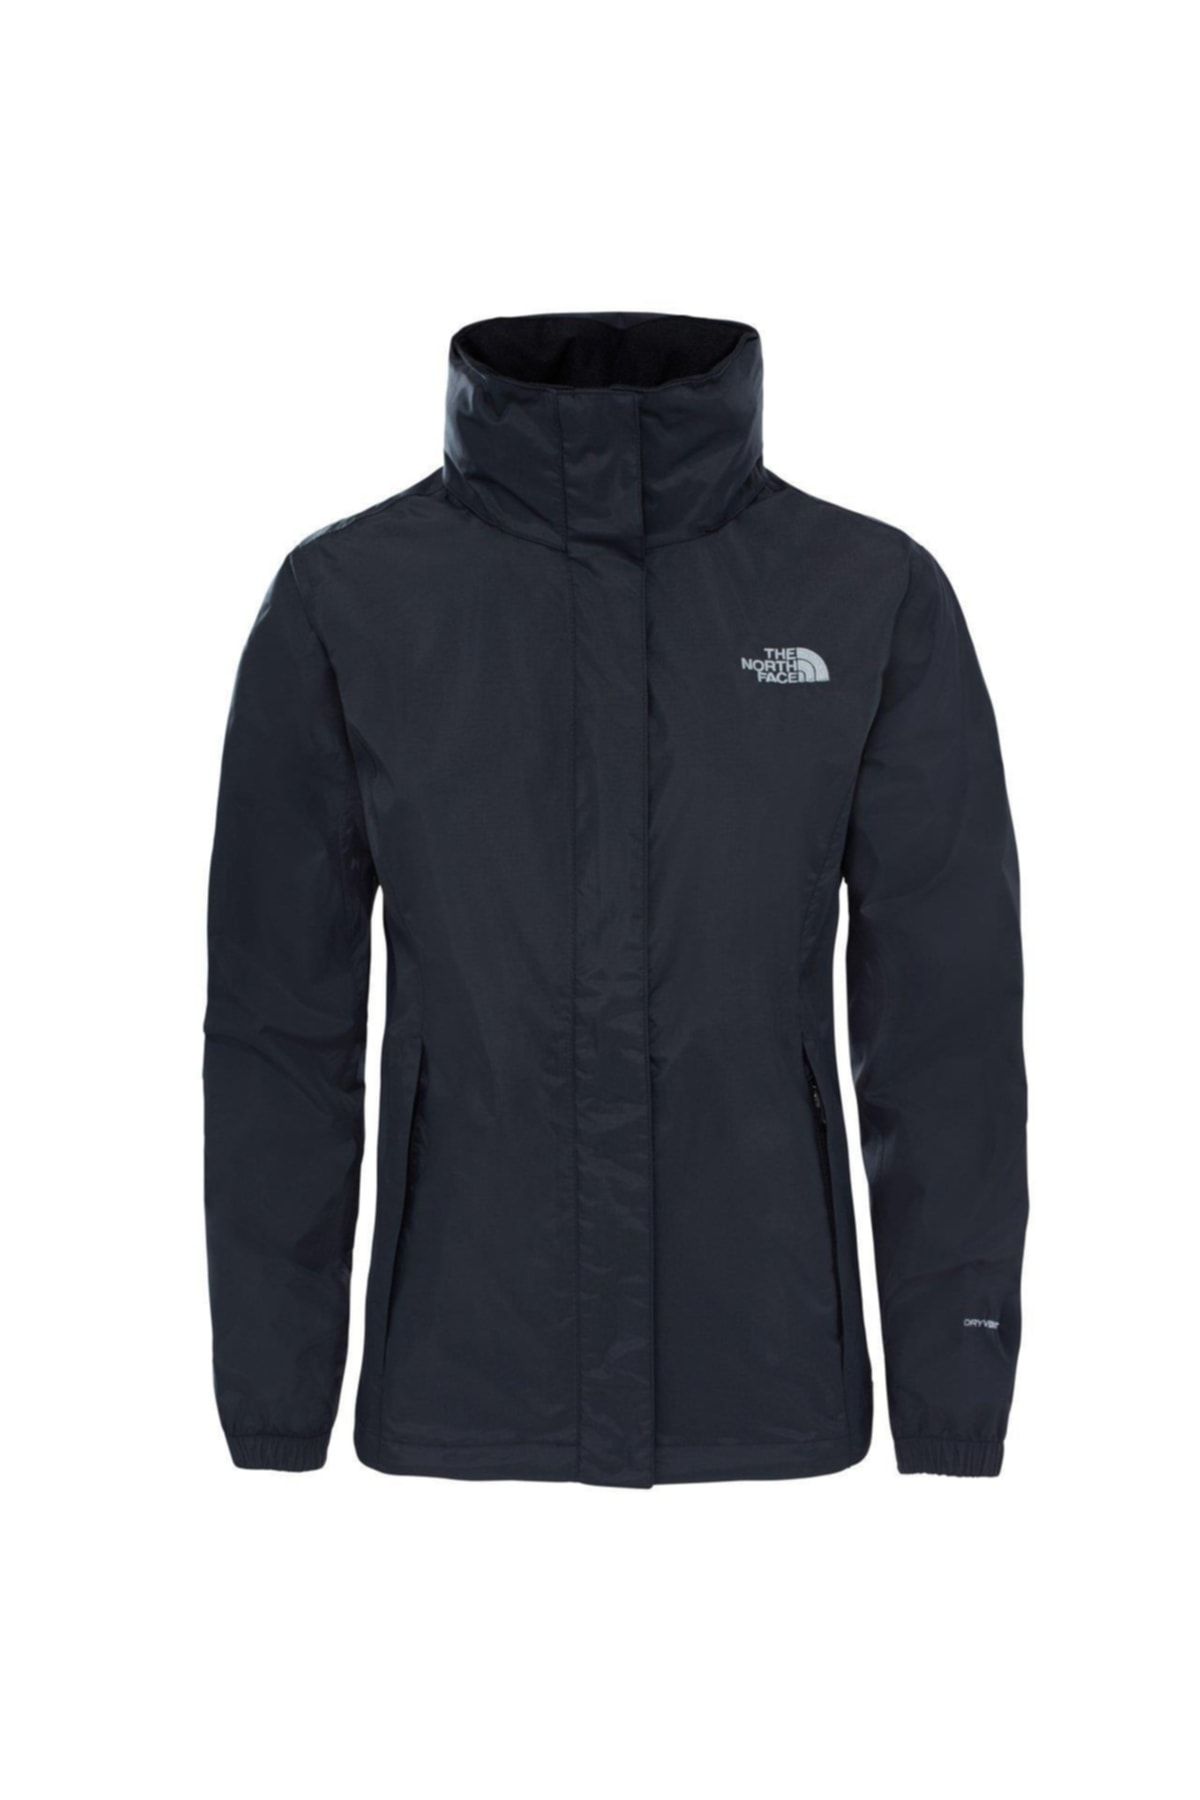 The North Face W Resolve 2 Jacket Nf0a2vcujk31